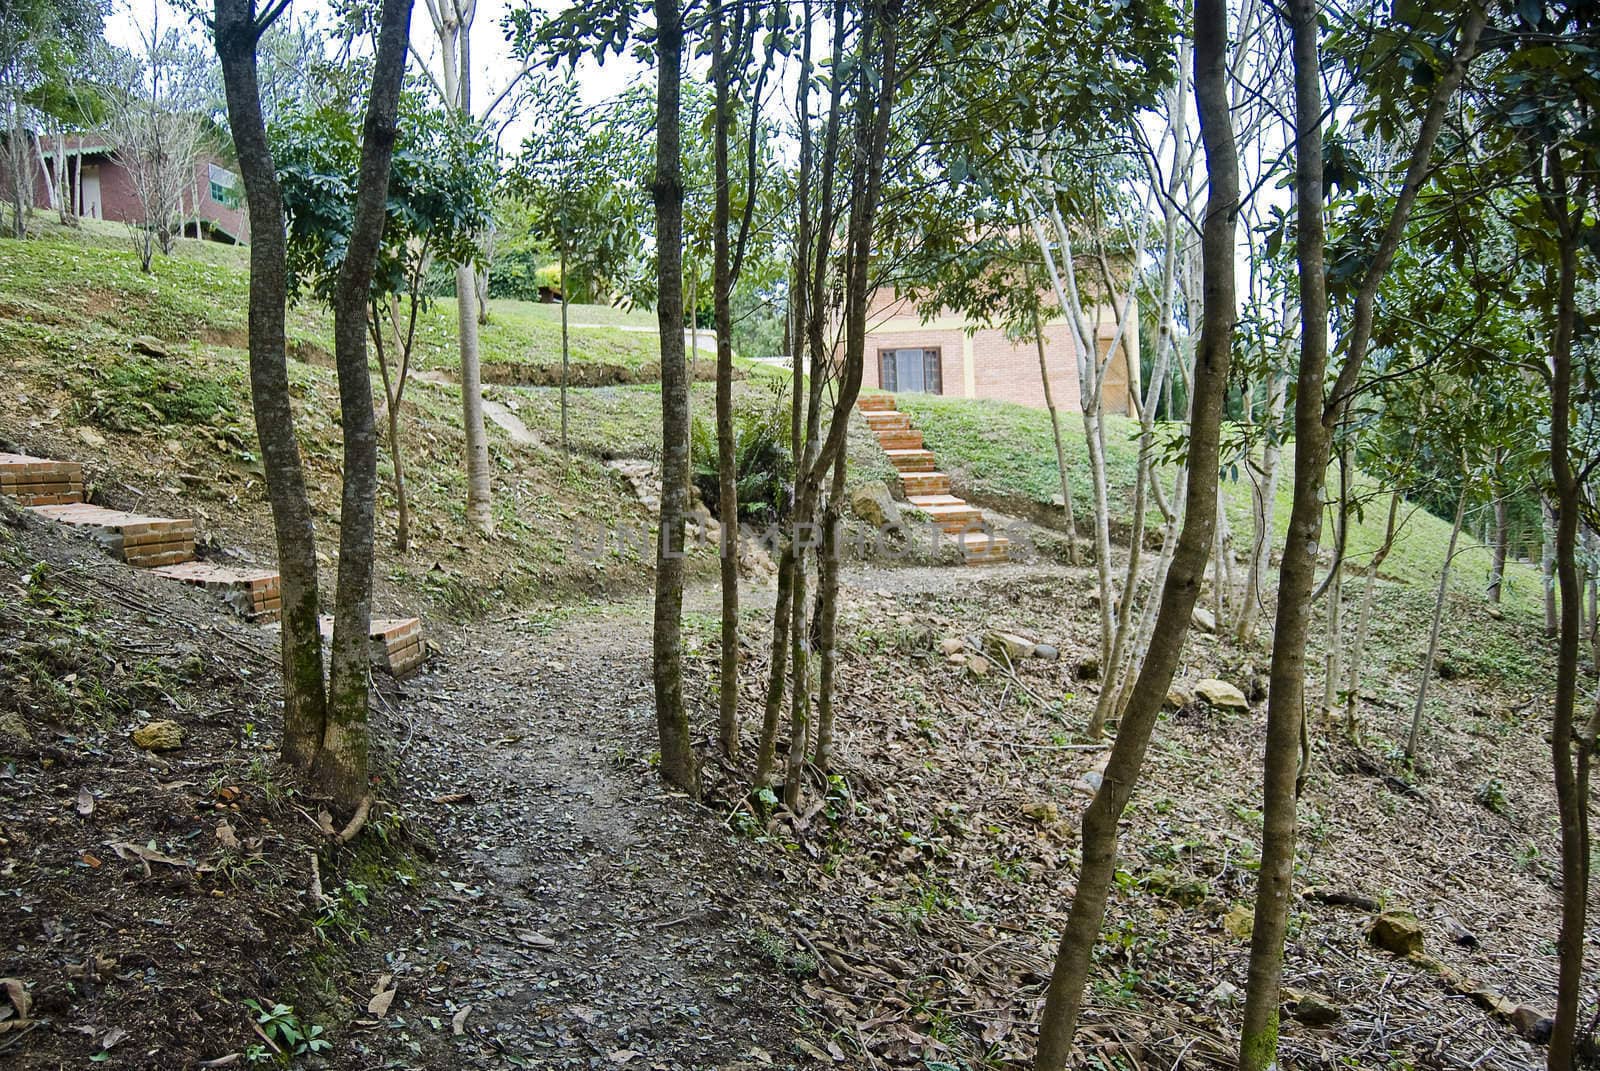 Track on the forest with houses and stairs.